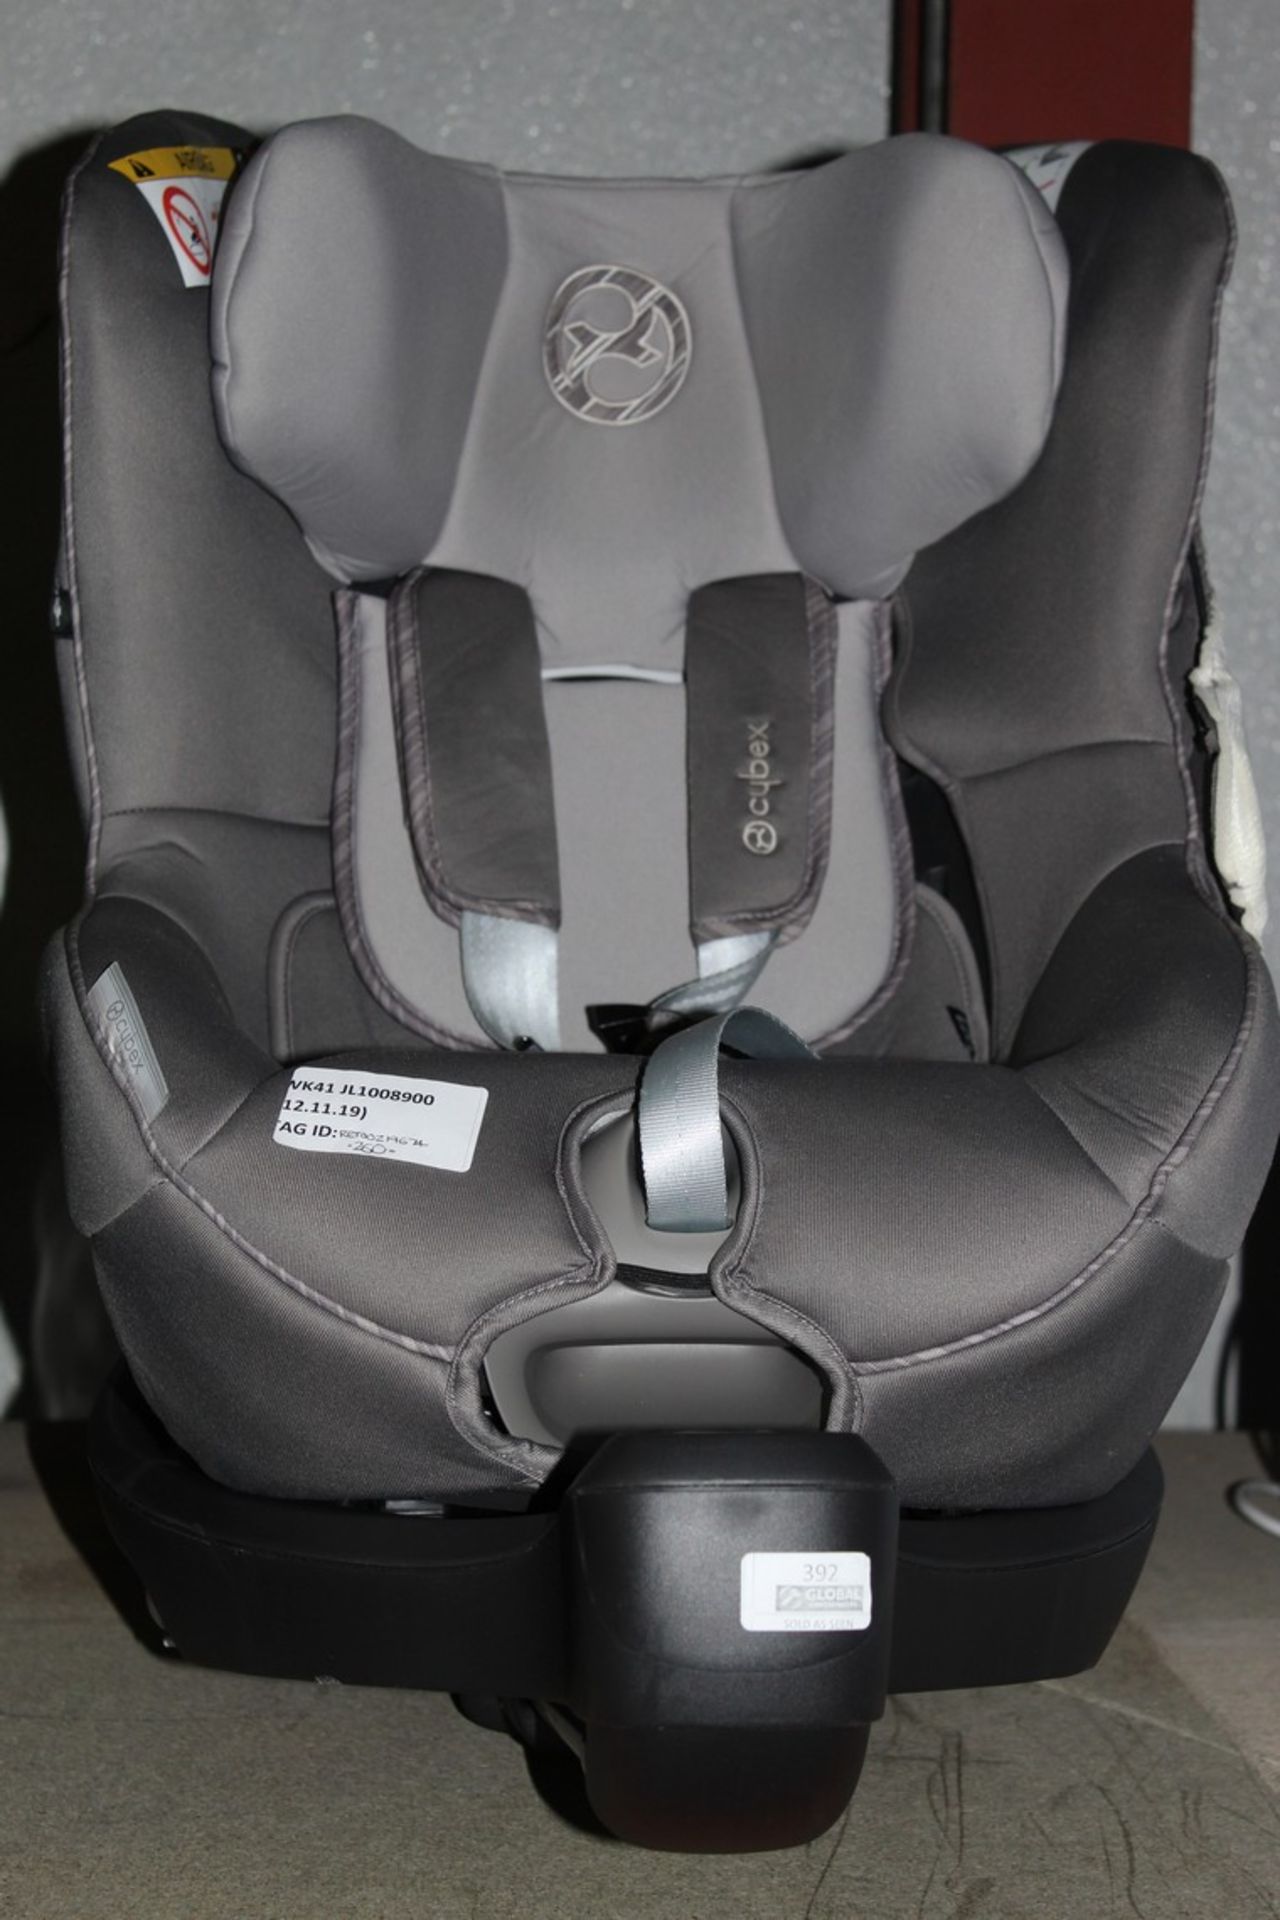 Cybex Gold In Car Children's Safety Seat with Base RRP 3360 (RET00212674) (Public Viewing and